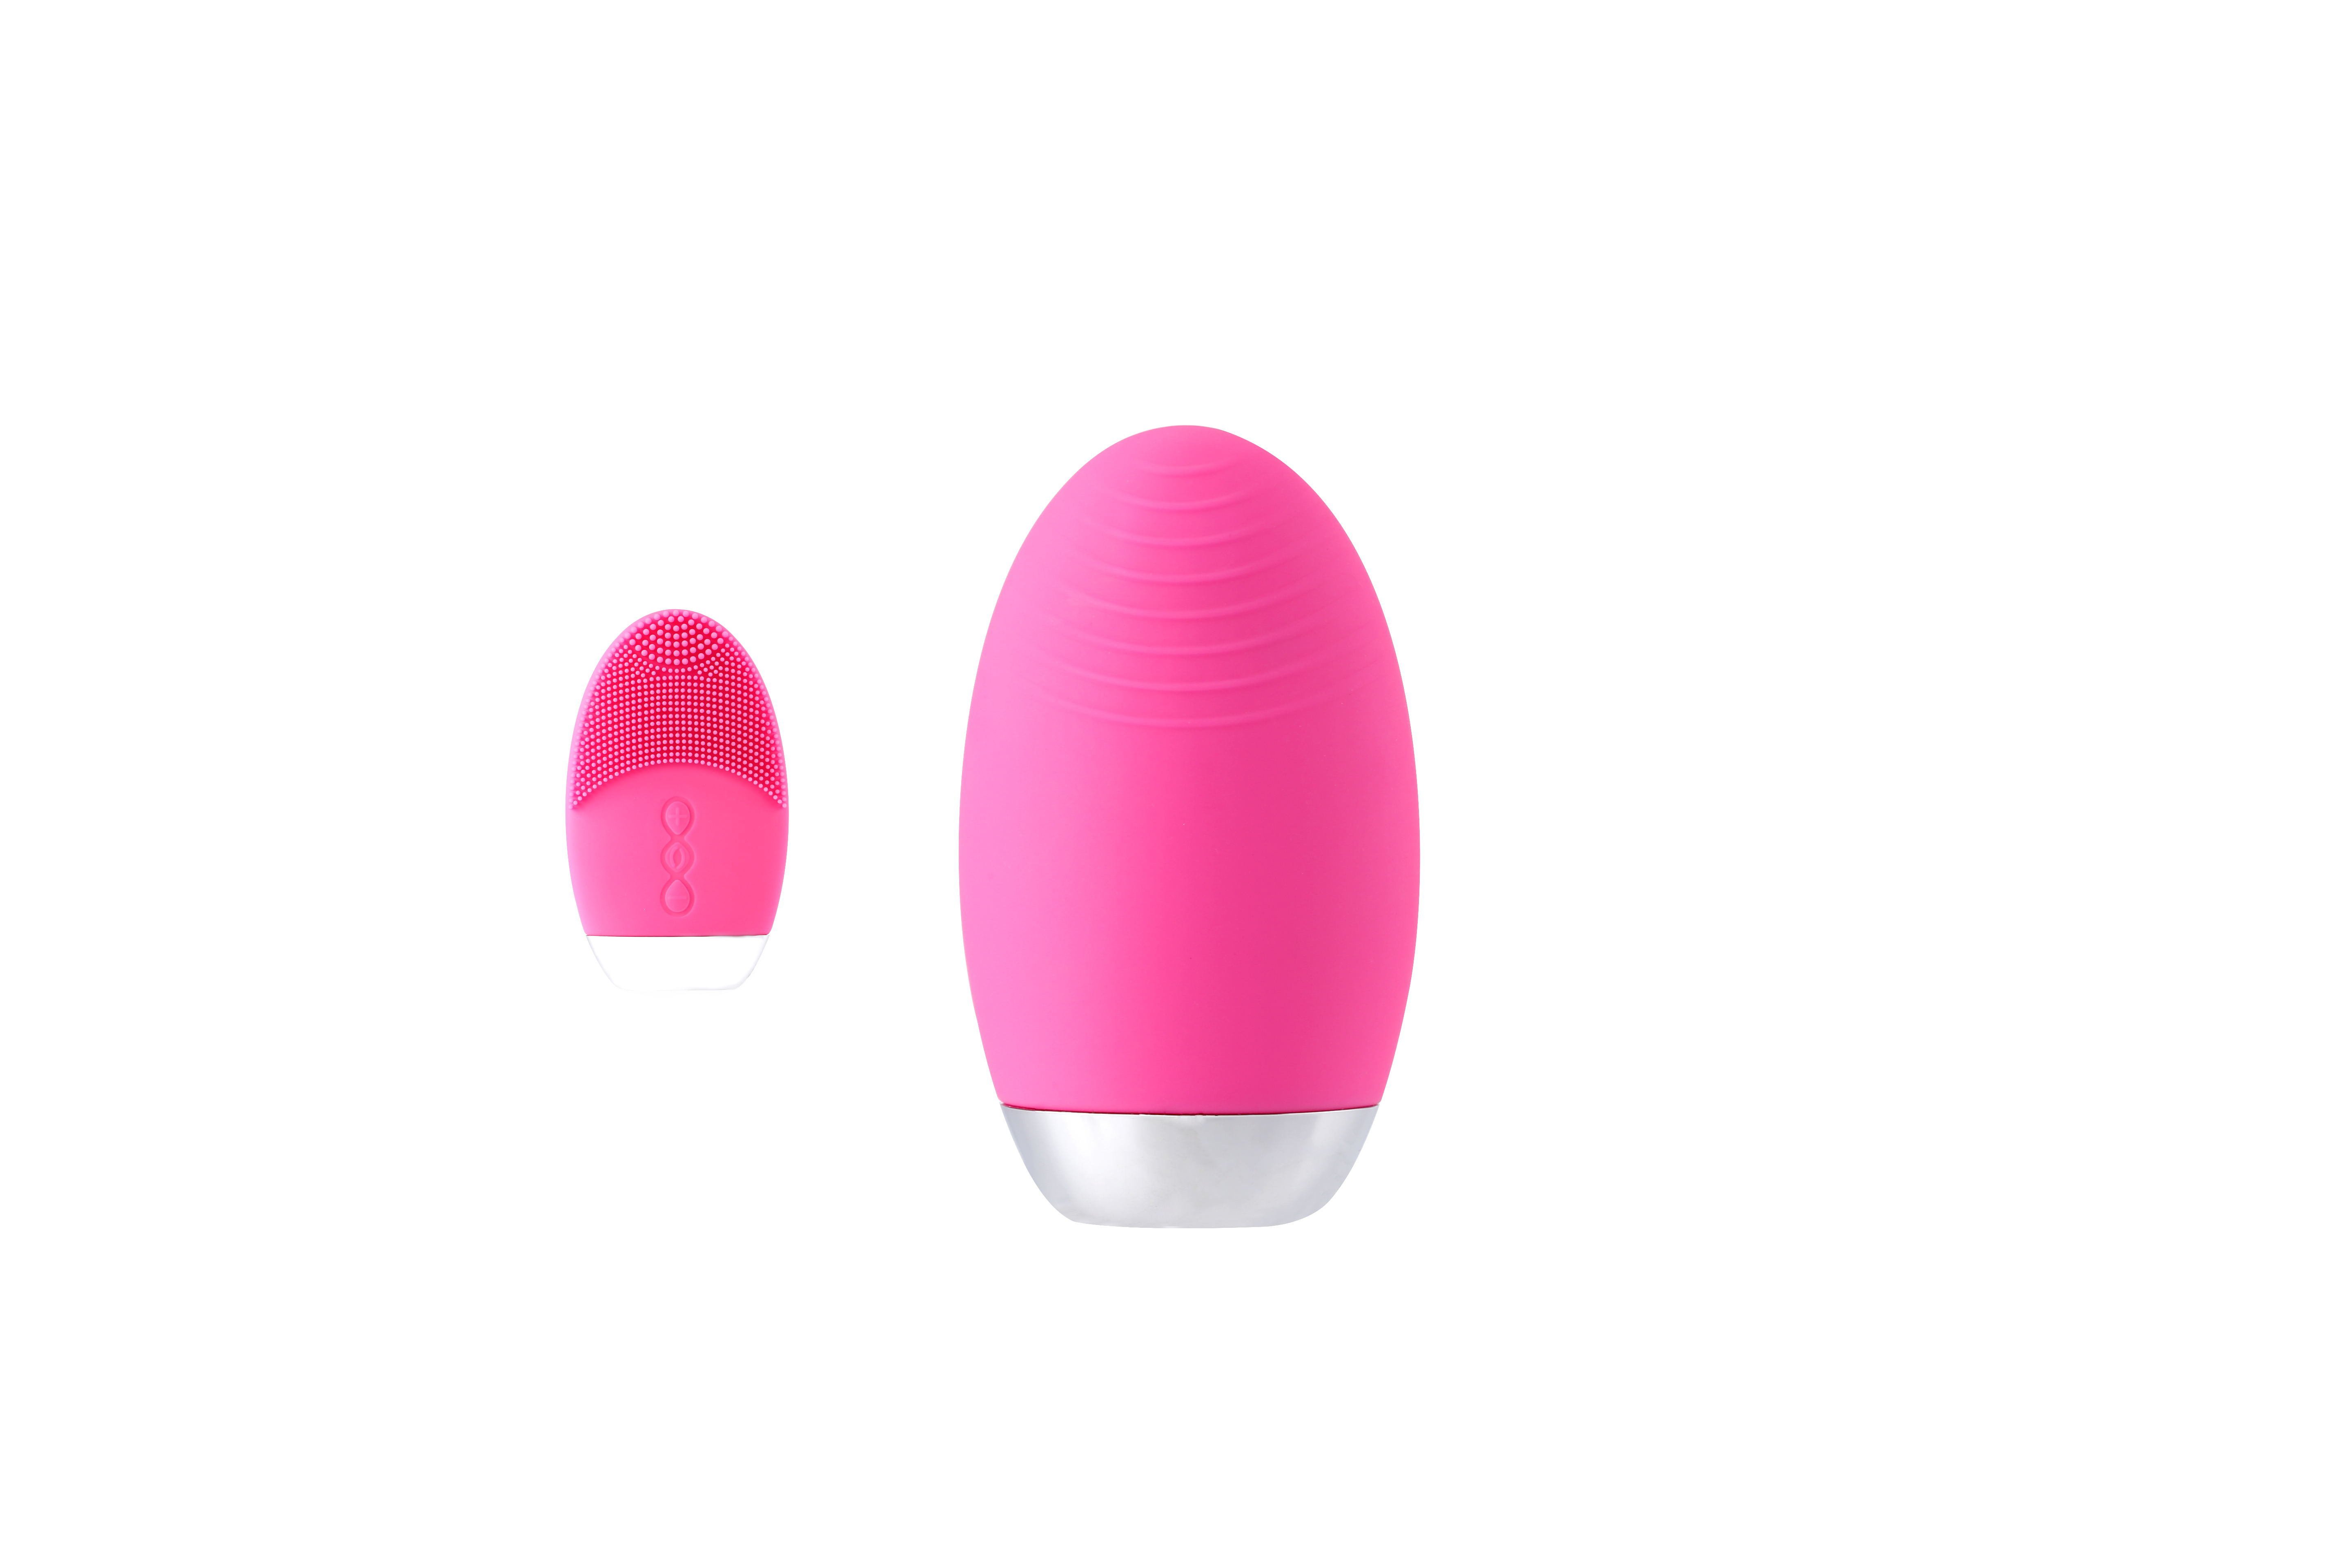 Silicon Facial Skin Care Cleansing Brush with Massager